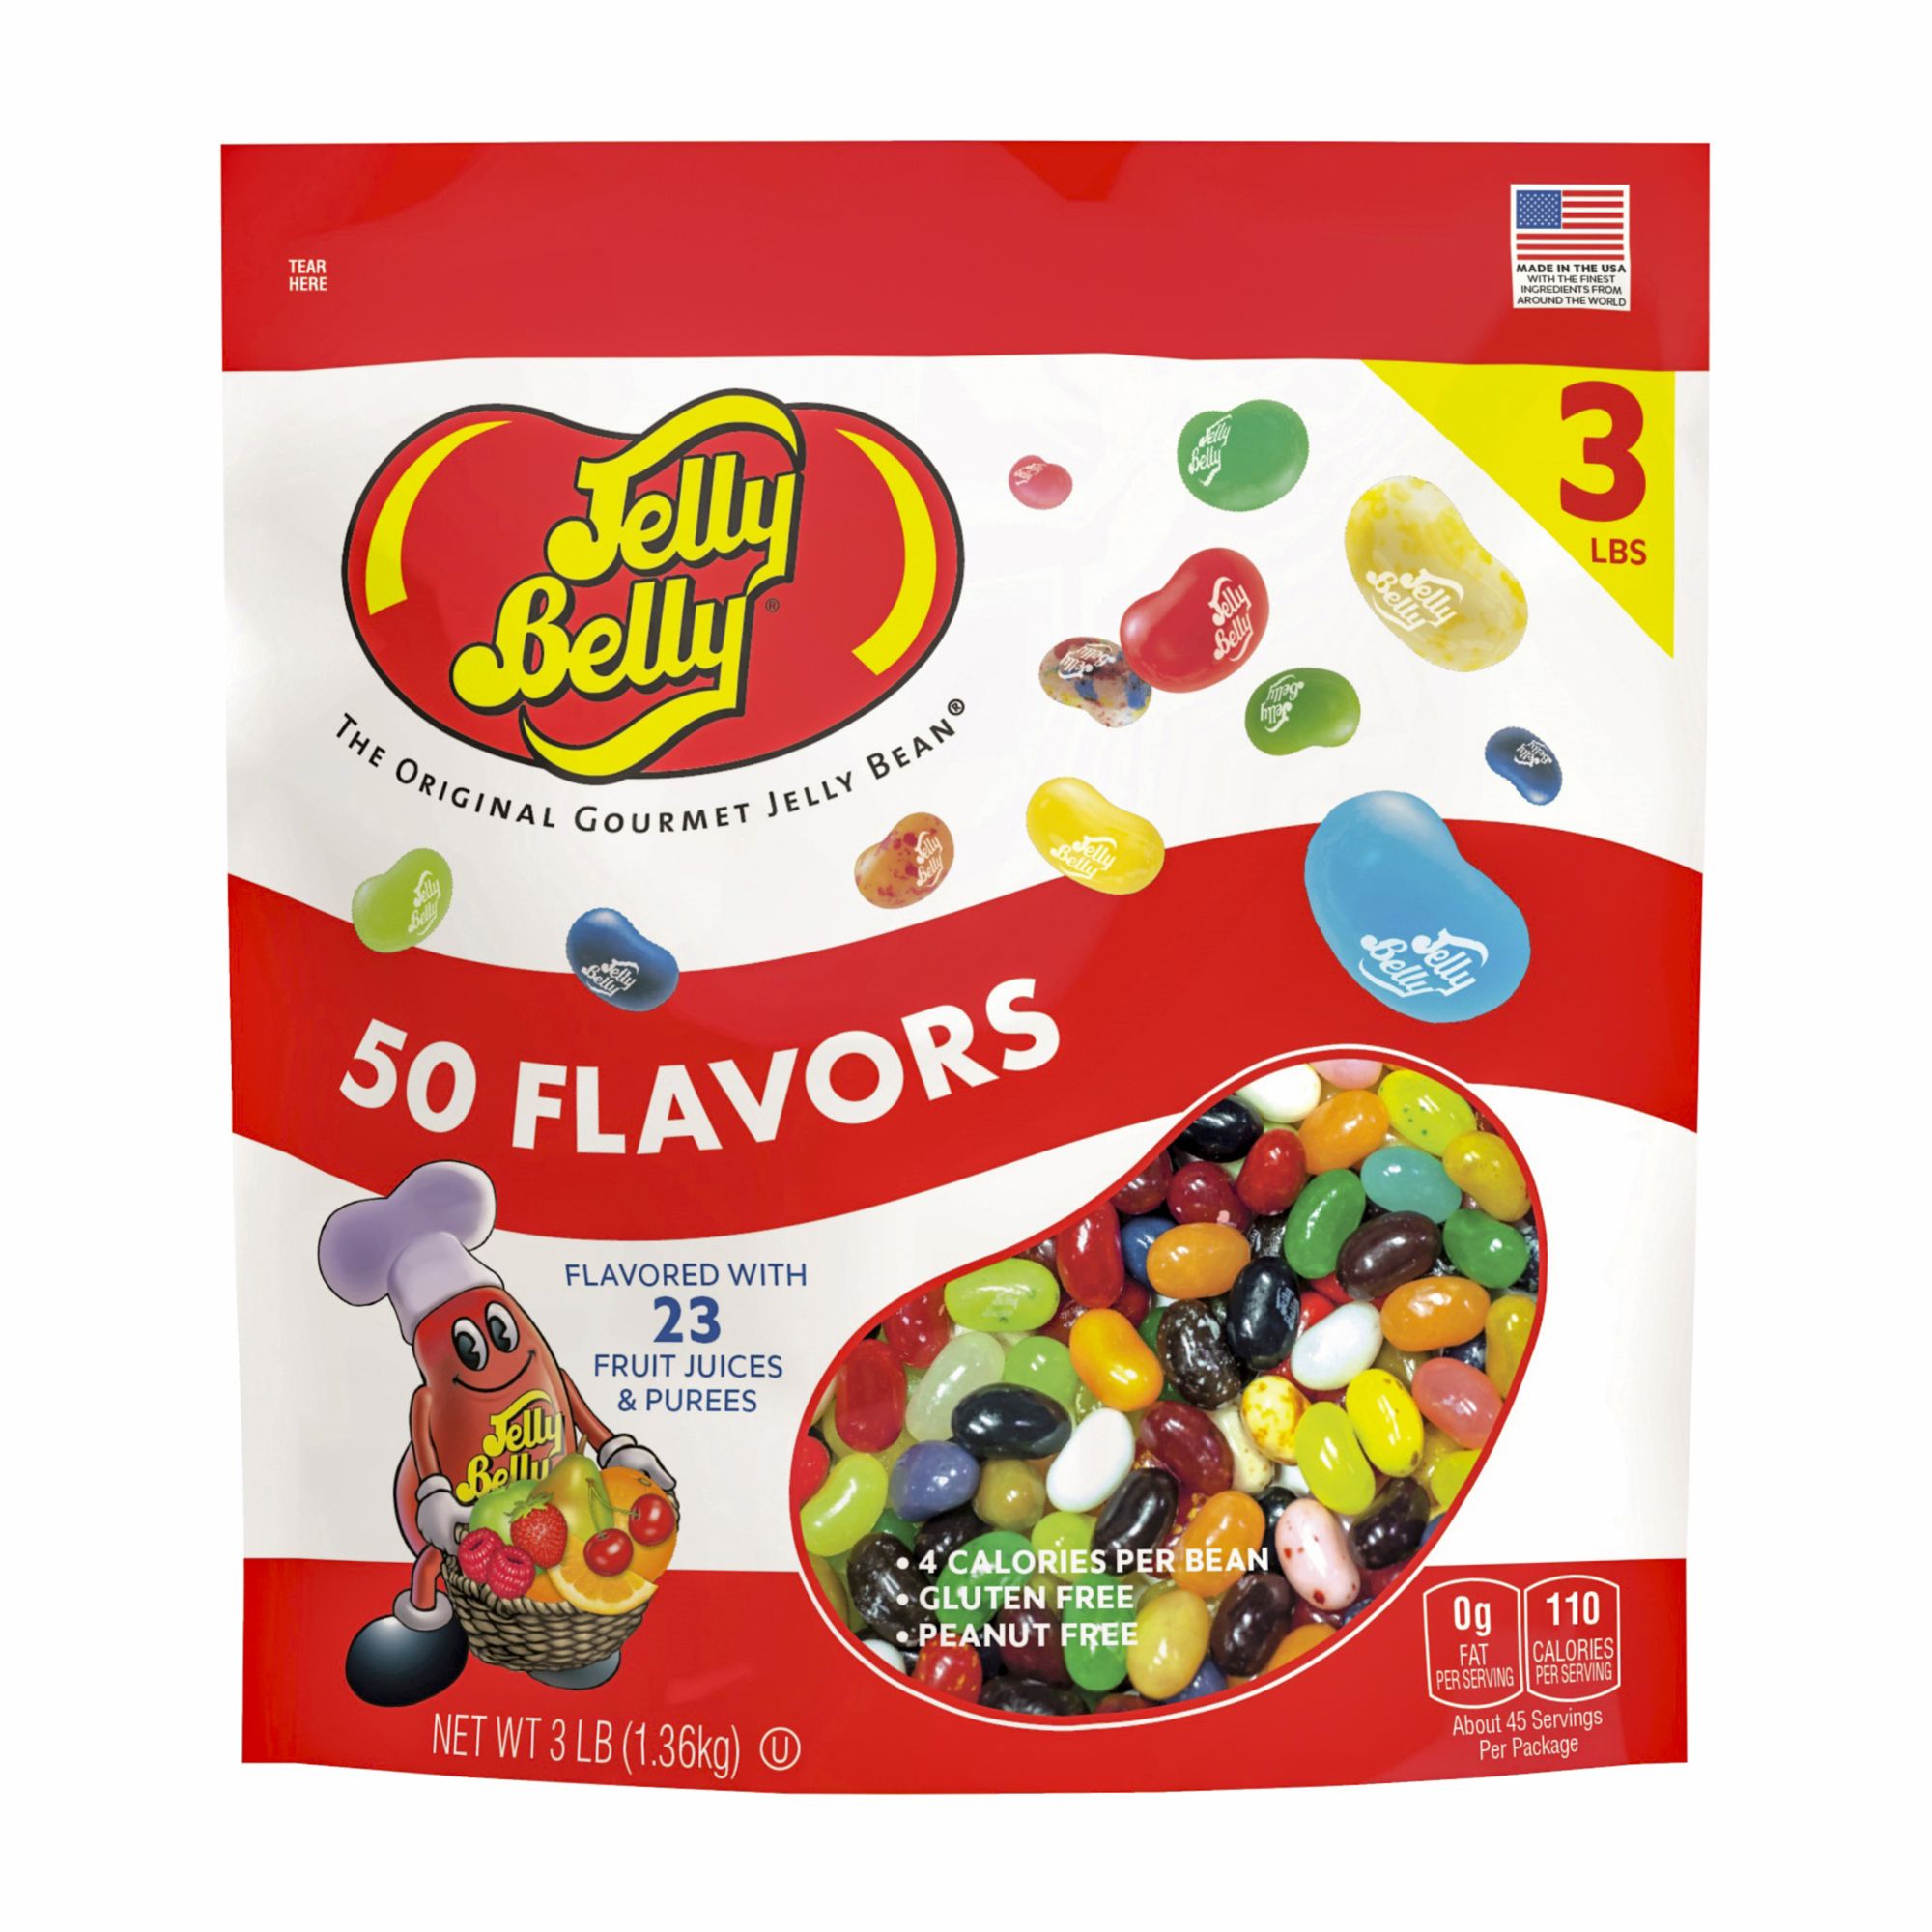 Brach'S Classic Jelly Beans, Assorted Flavors, 54 Ounce Bulk Candy Bags  (Pack of